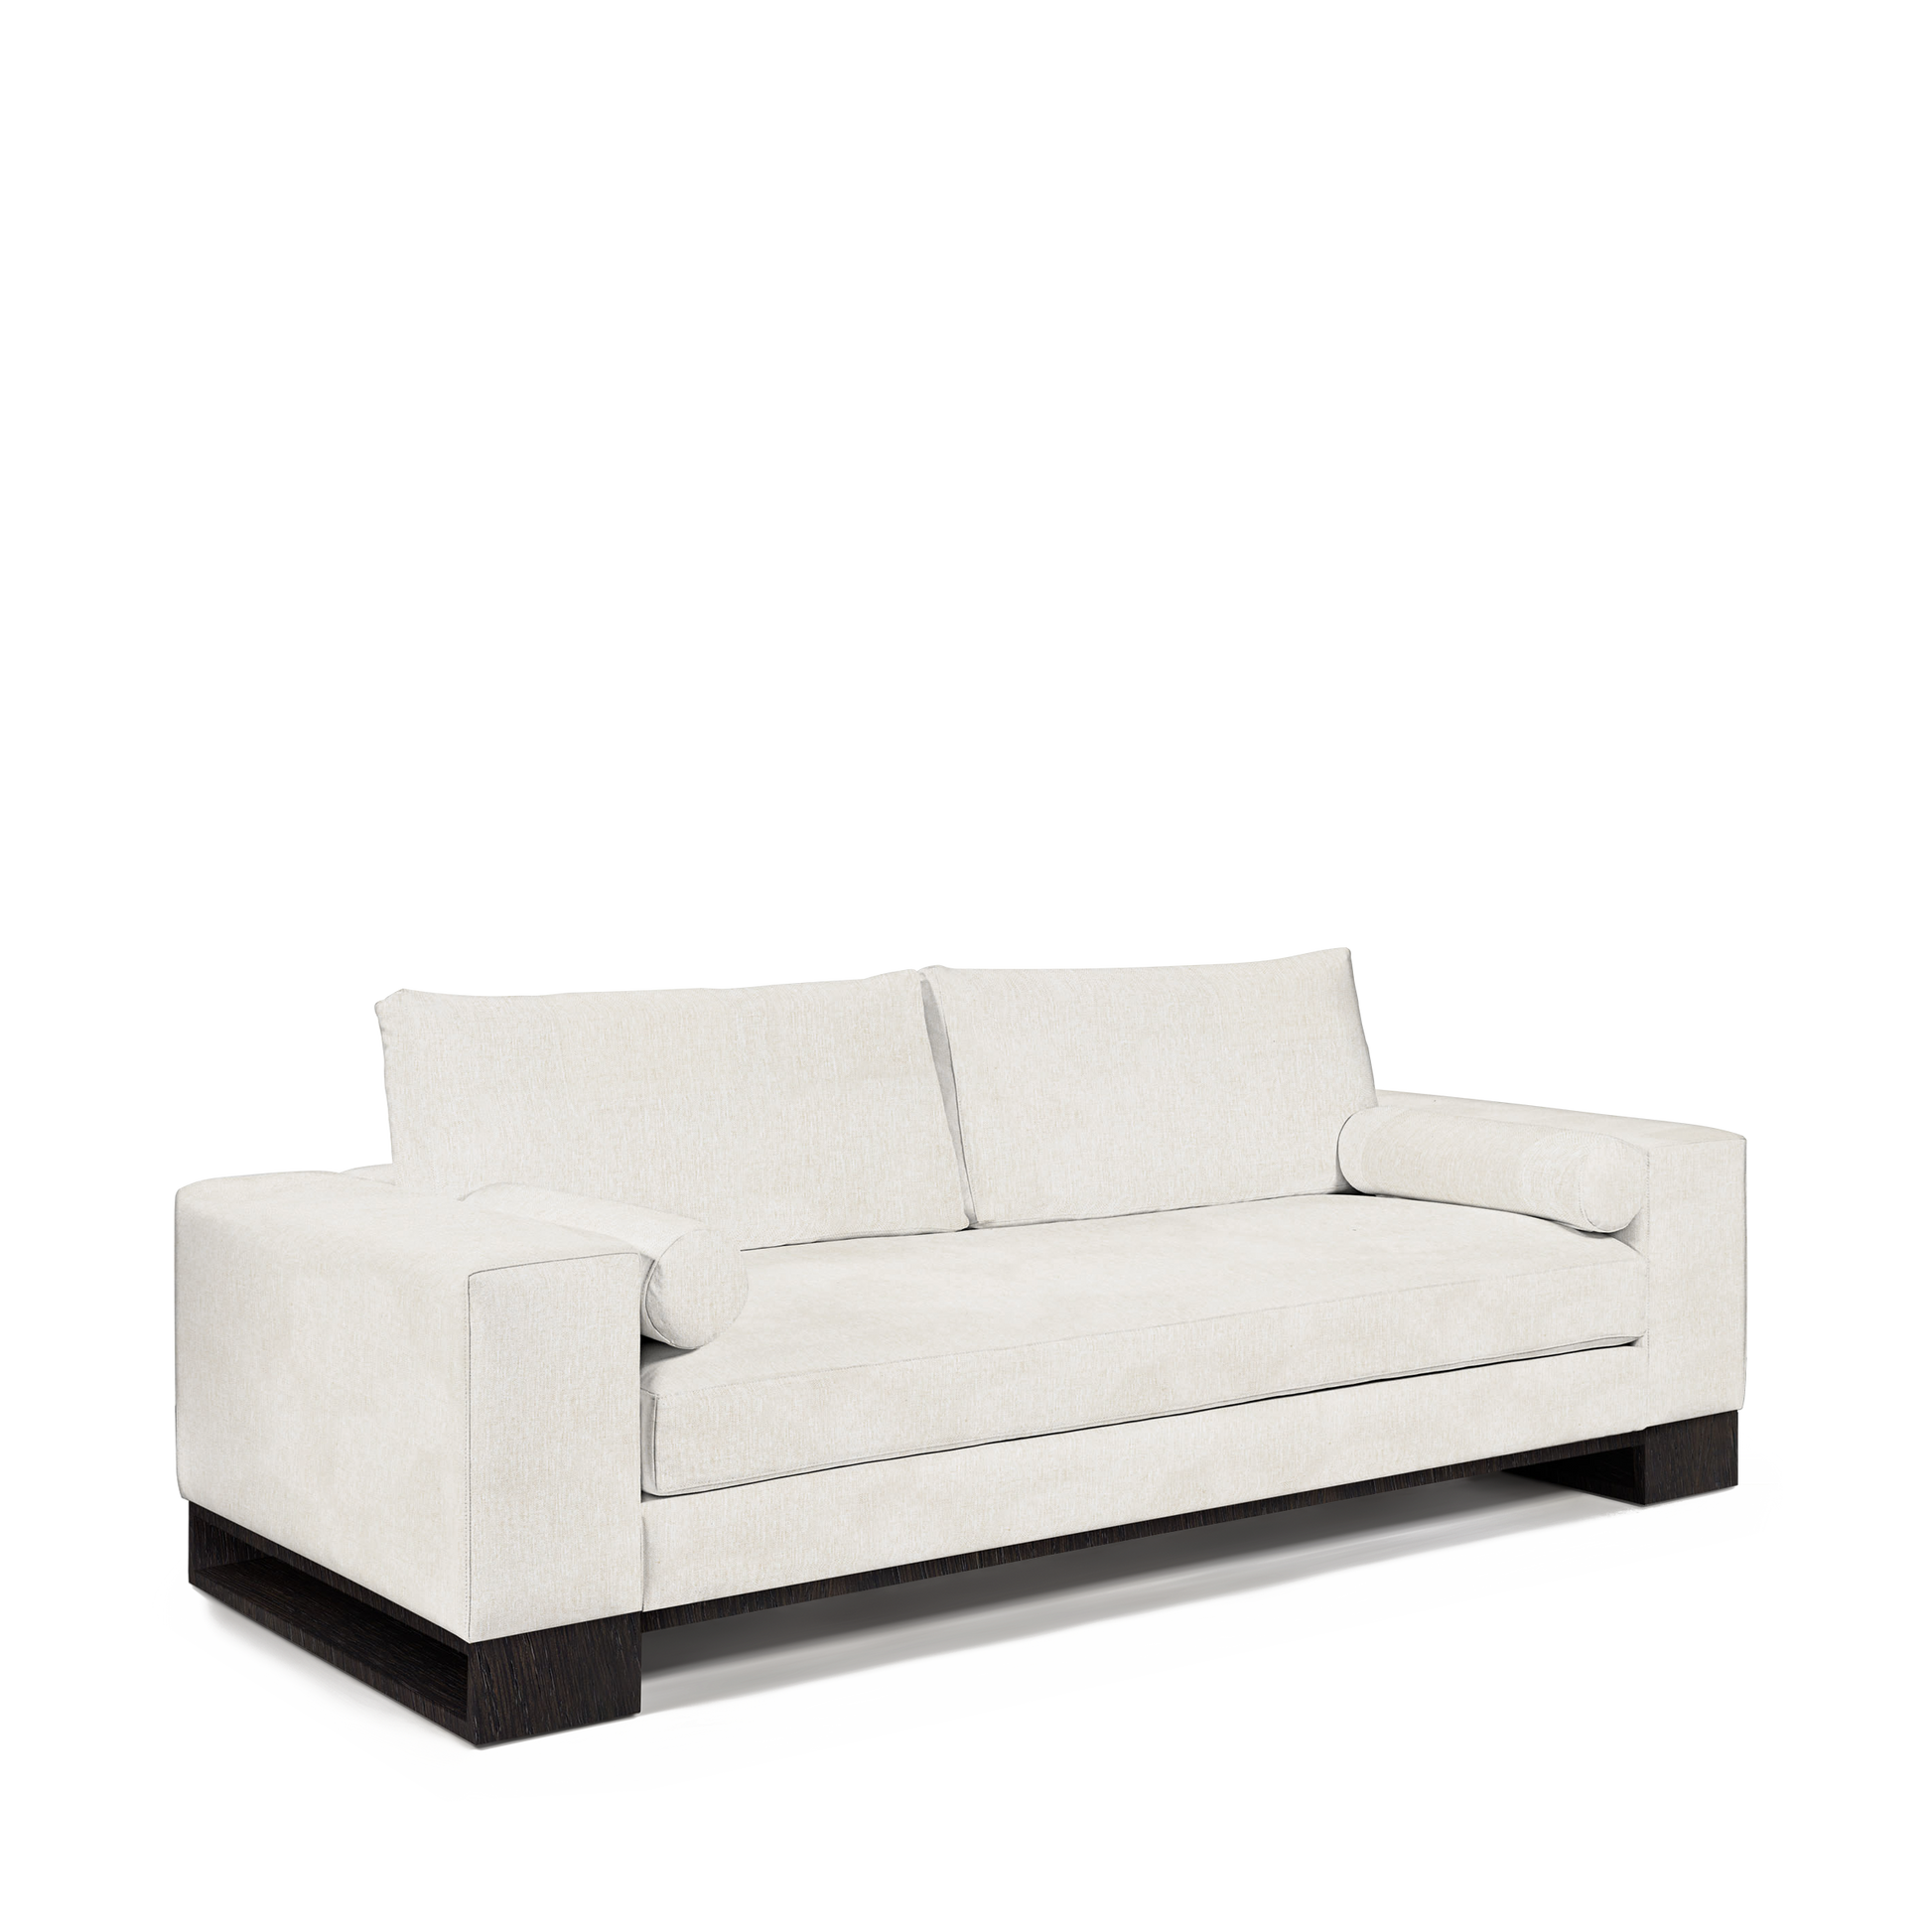 TERRA 2,5-seater sofa with bolt white textile and chocolate wood legs 